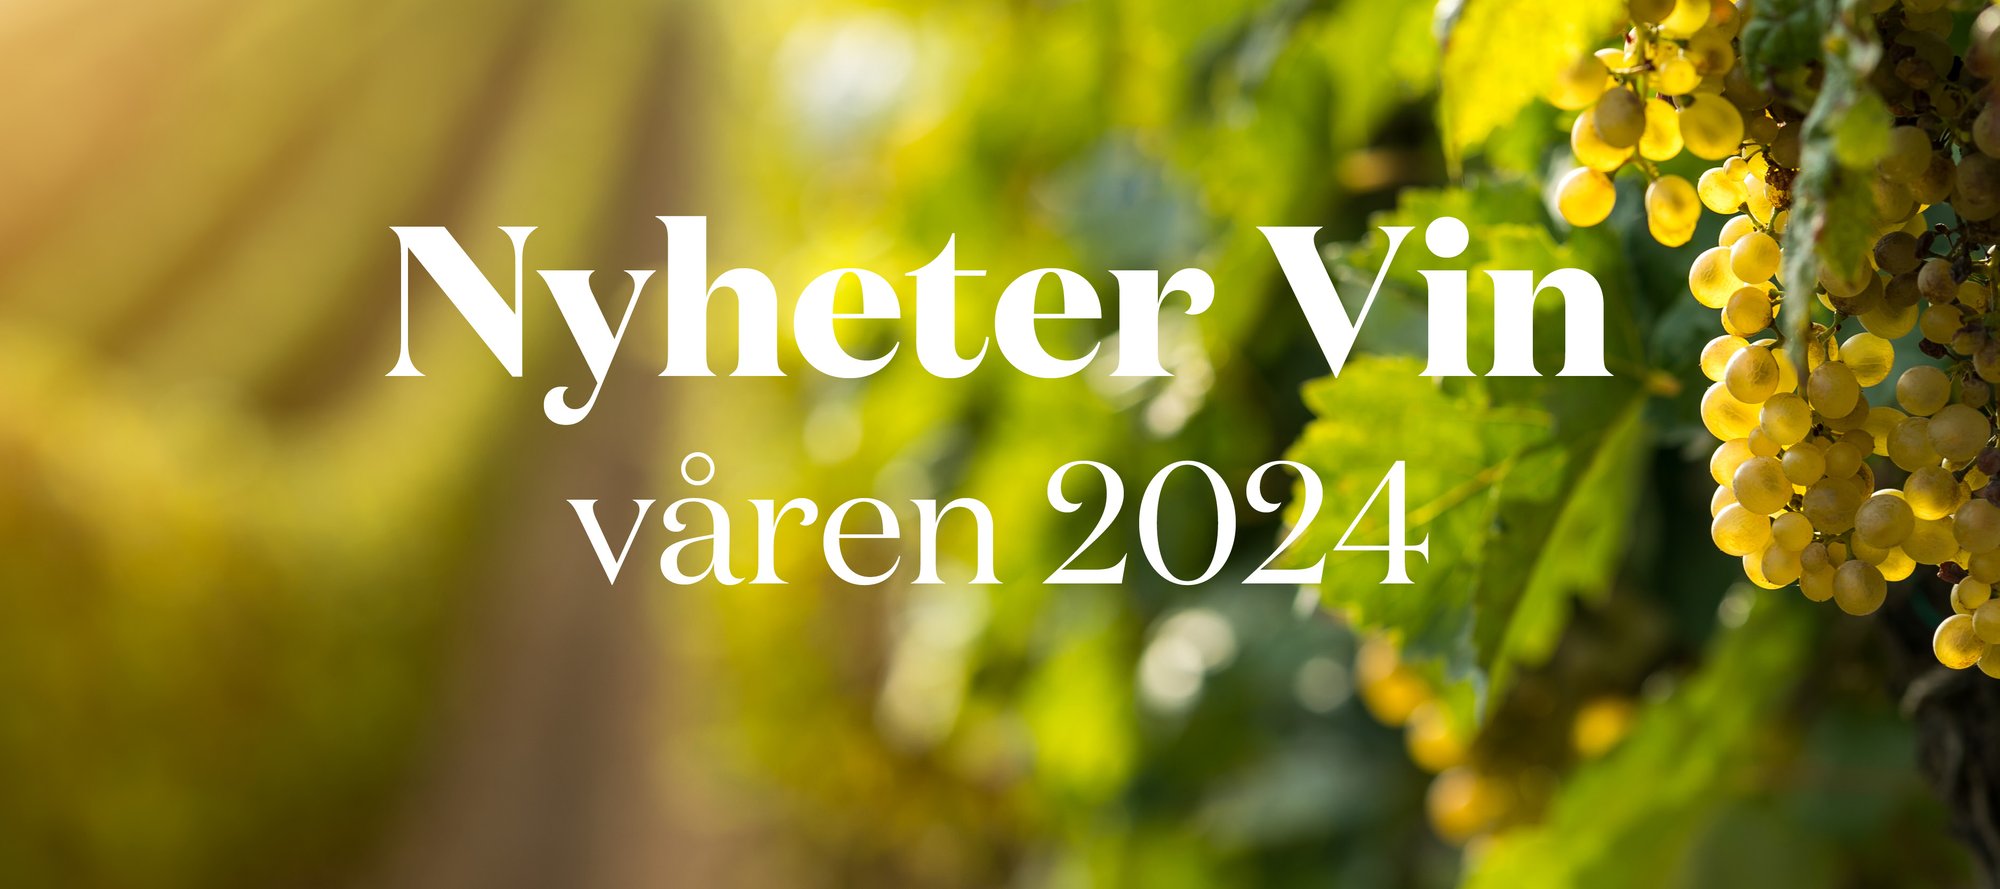 nyehter_vin_2024